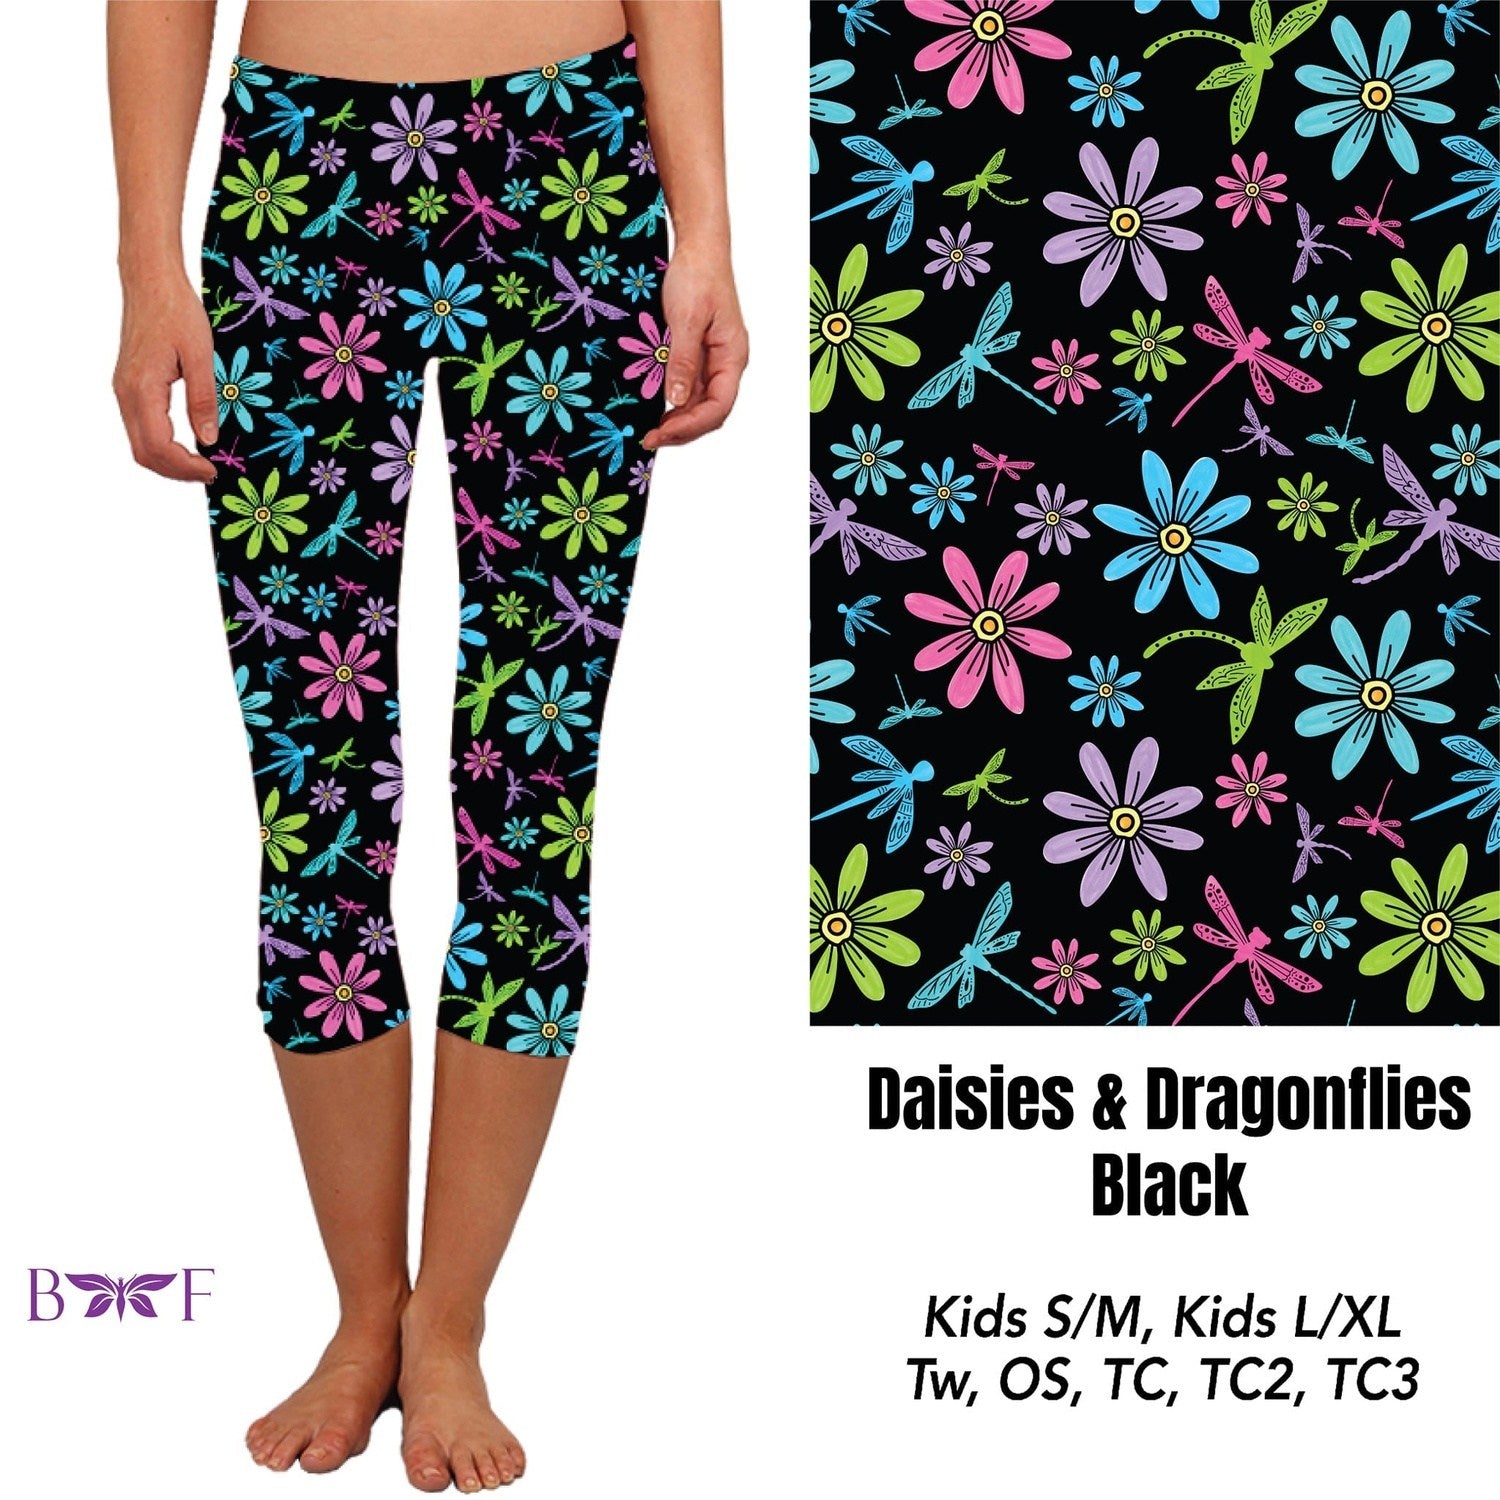 Daisies and Dragonflies Black Leggings with pockets Capris